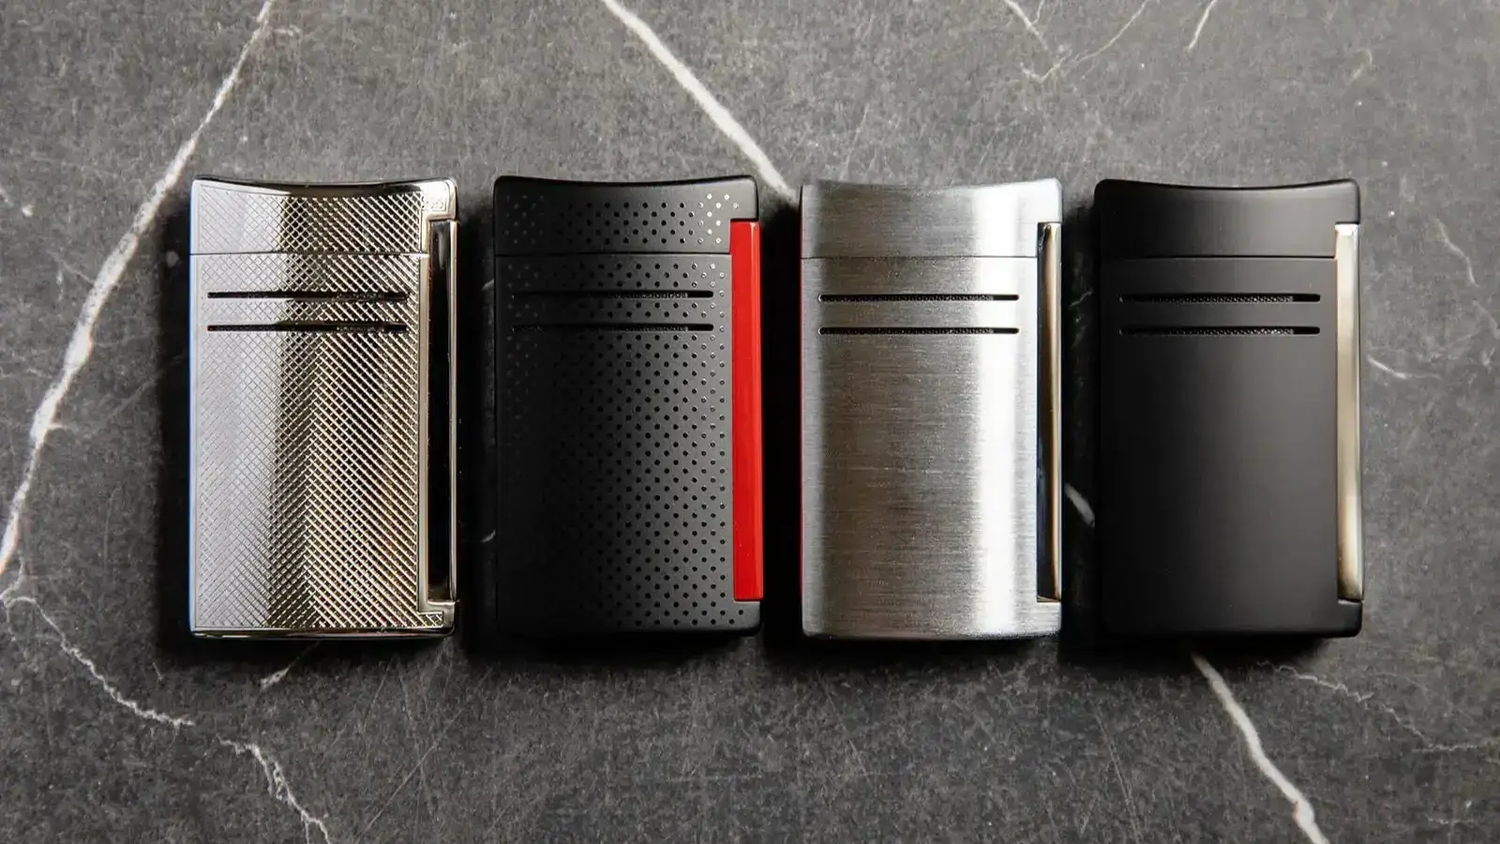 S.T. Dupont Maxijet torch lighters on marble background. Left to right - chrome grid, punched red and black, chrome, matte black